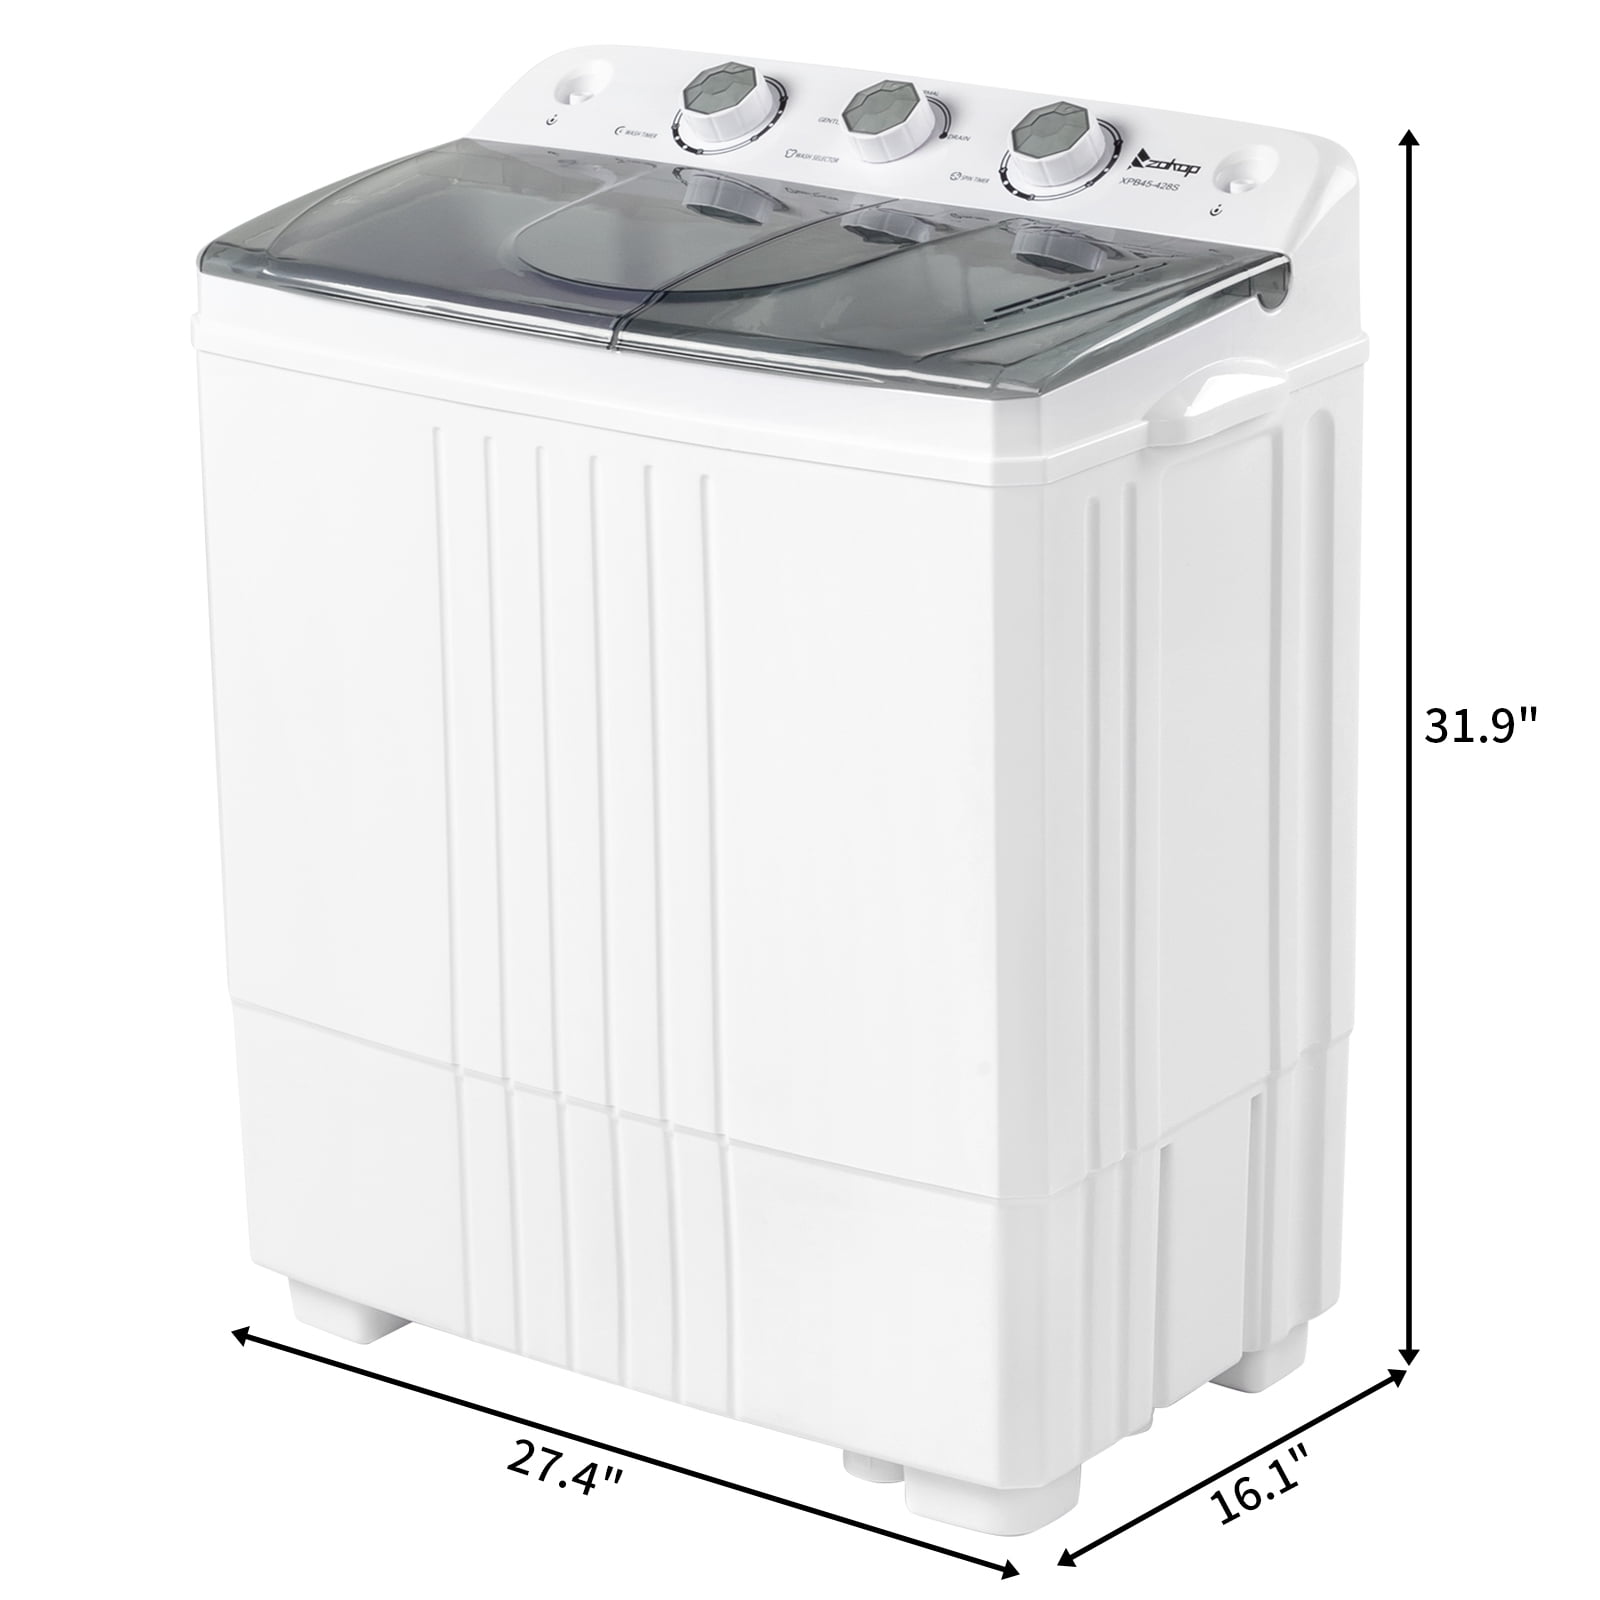 Tikmboex Portable Washing Machine, 30LBS Twin Tub Mini Compact Laundry  Washer 19lbs Washer/11lbs Spinner with Drain Pump & Time Control Washer  Spinner Combo, White&Gray 